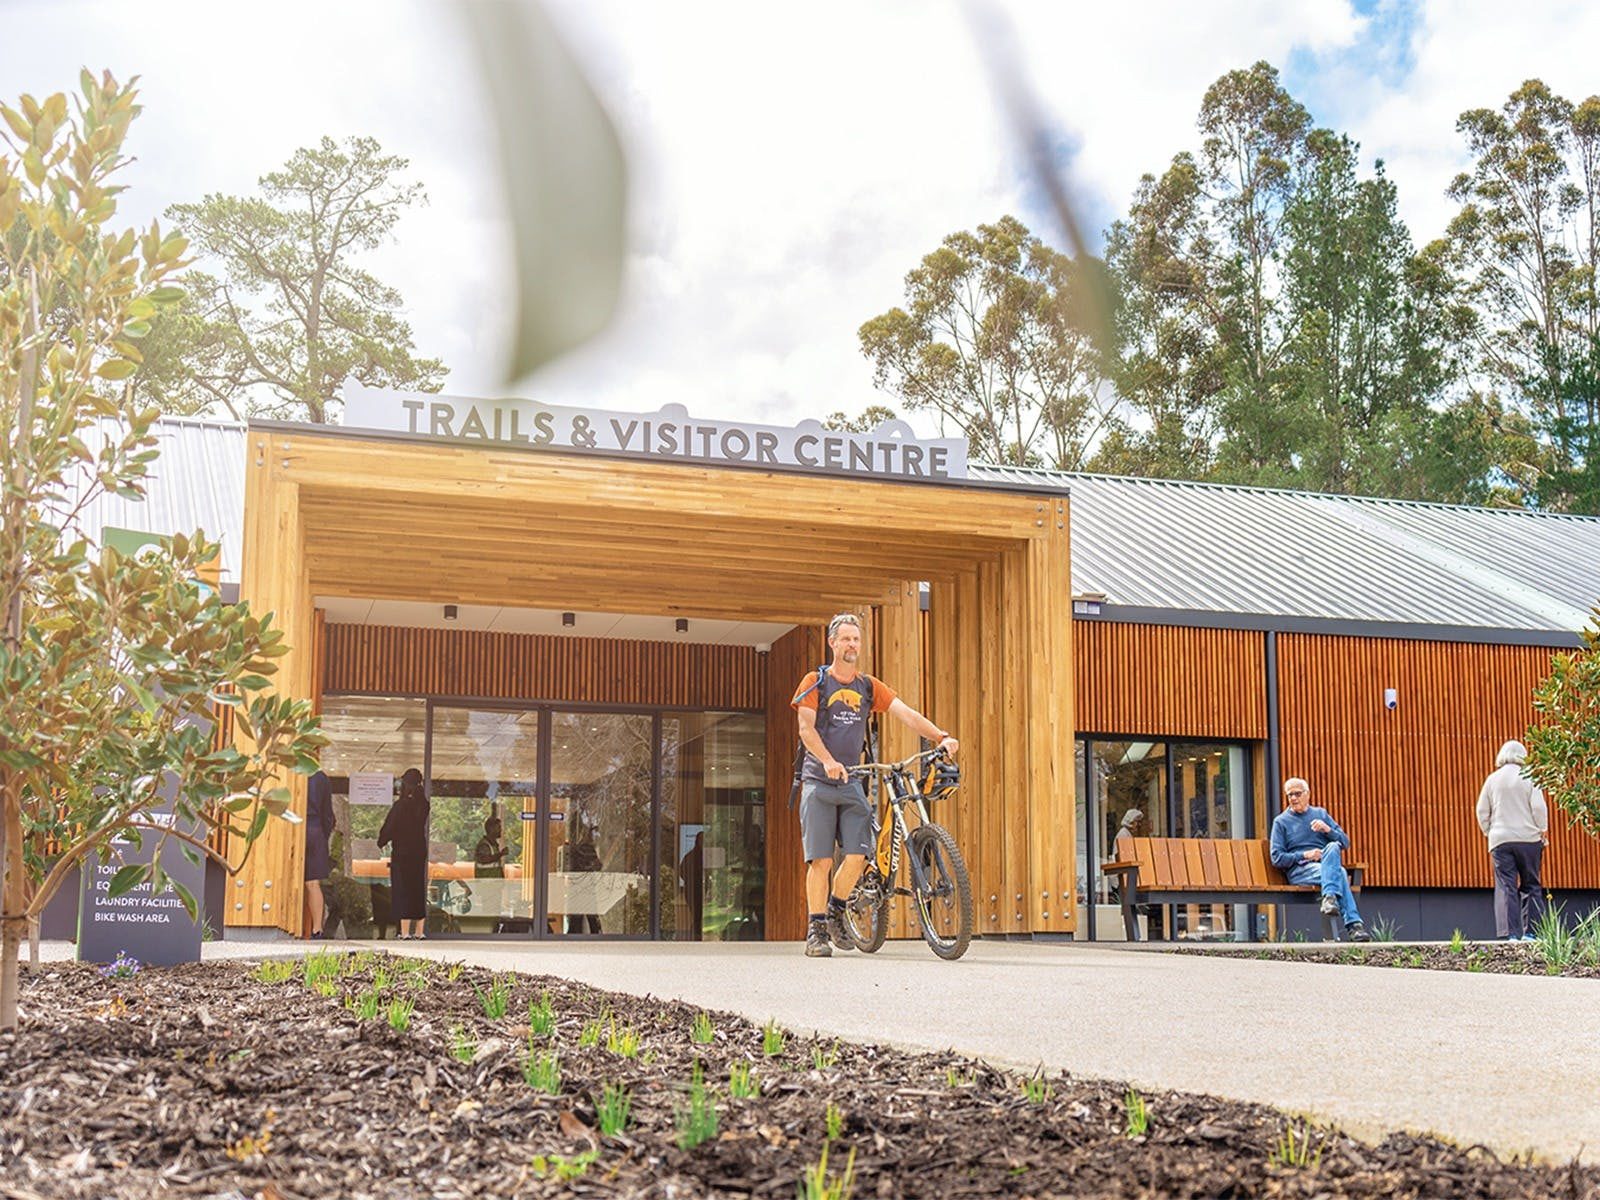 Dwellingup Trails and Visitor Centre